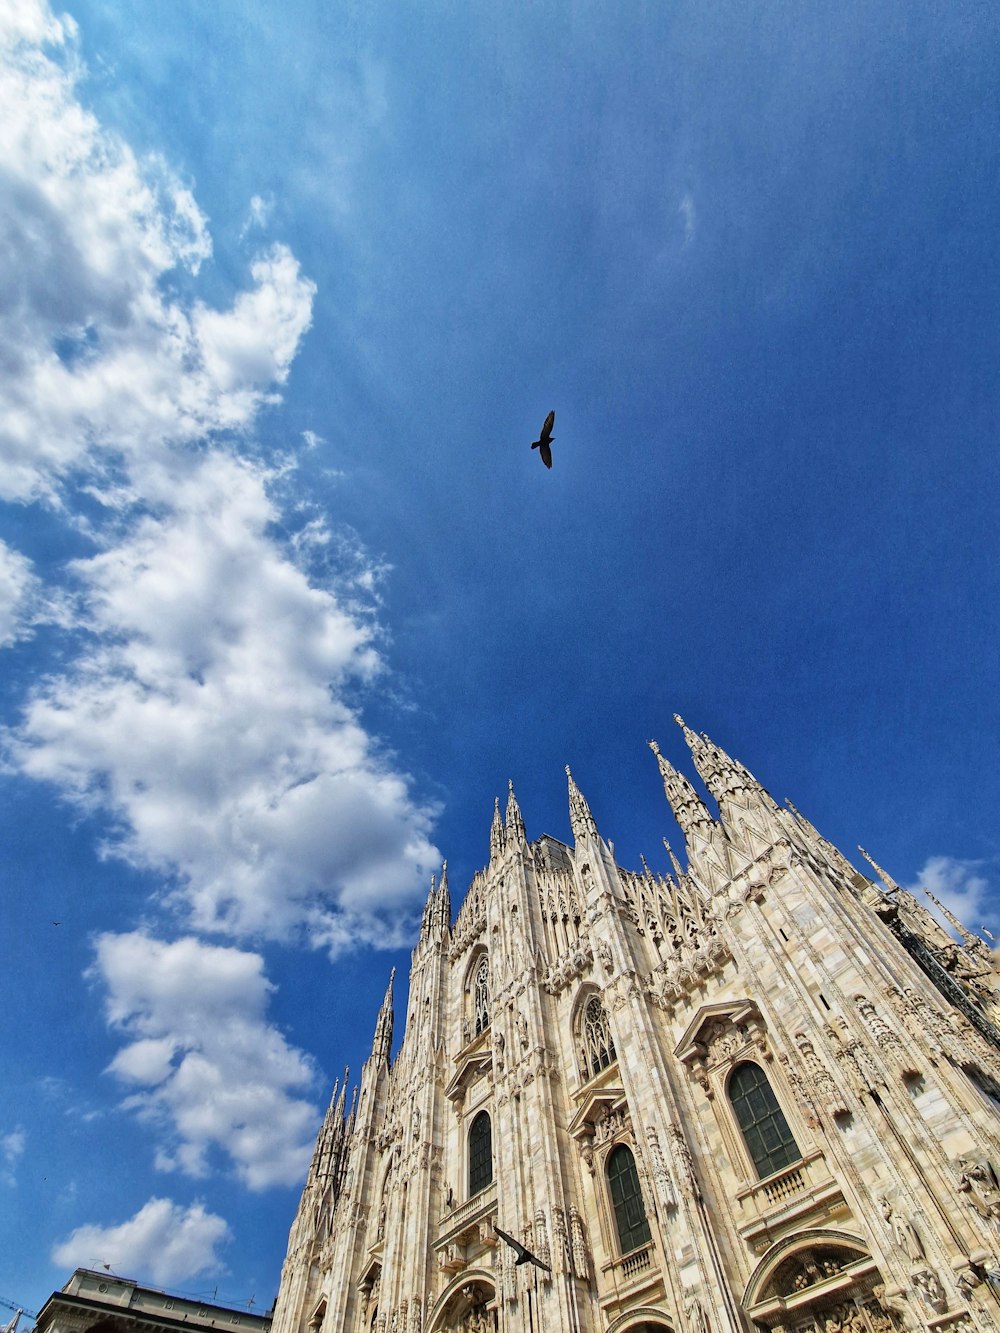 a large cathedral with a bird flying over it